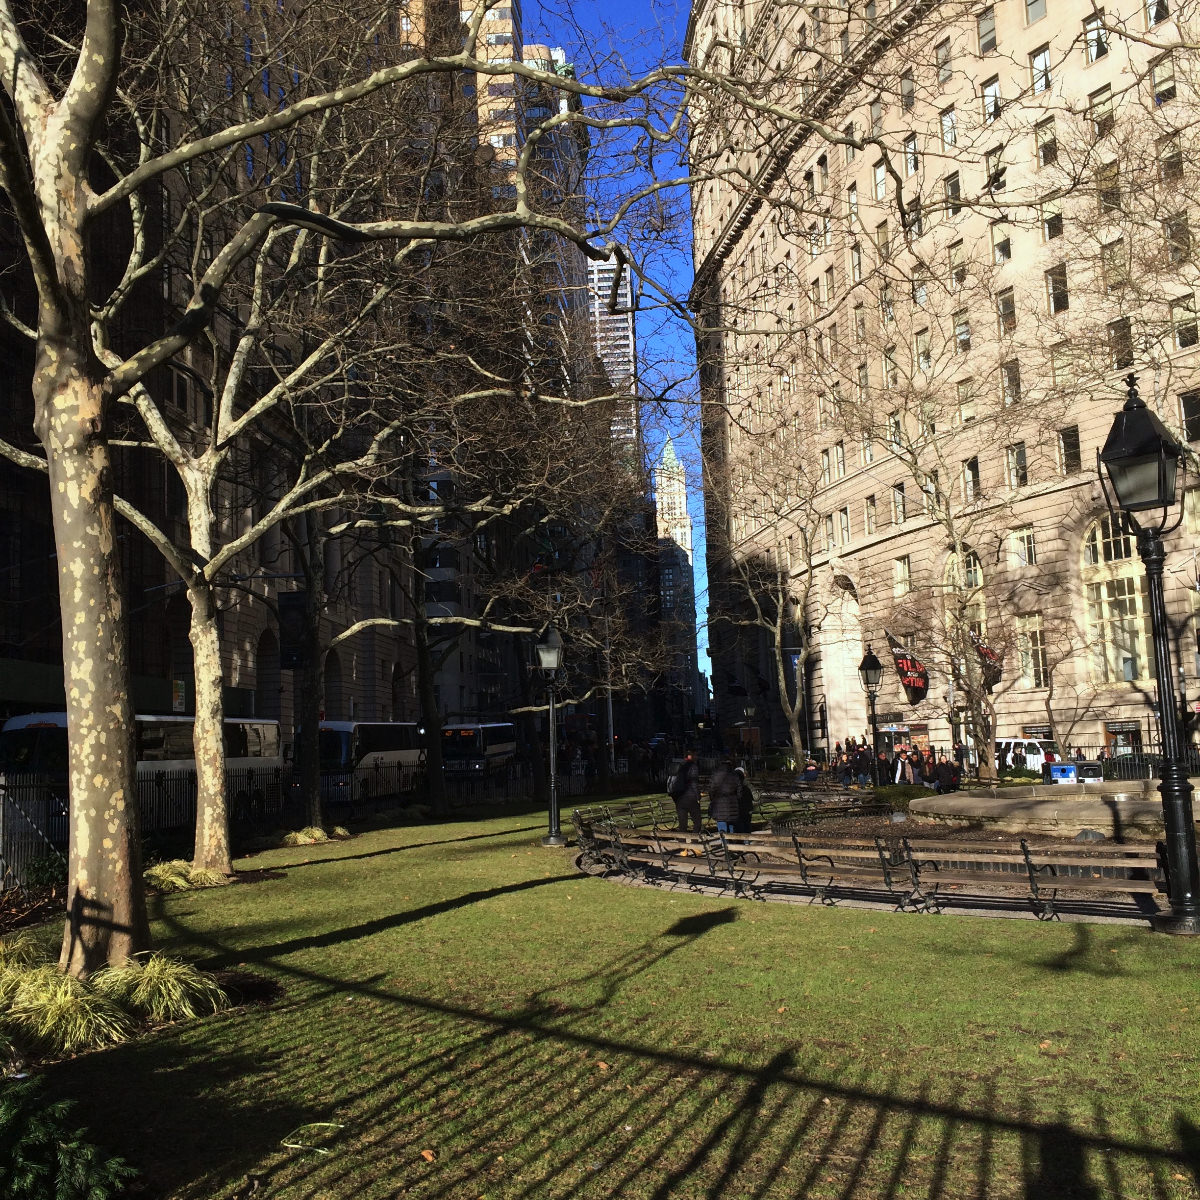 Bowling Green park at the start of Broadway in the Financial District	